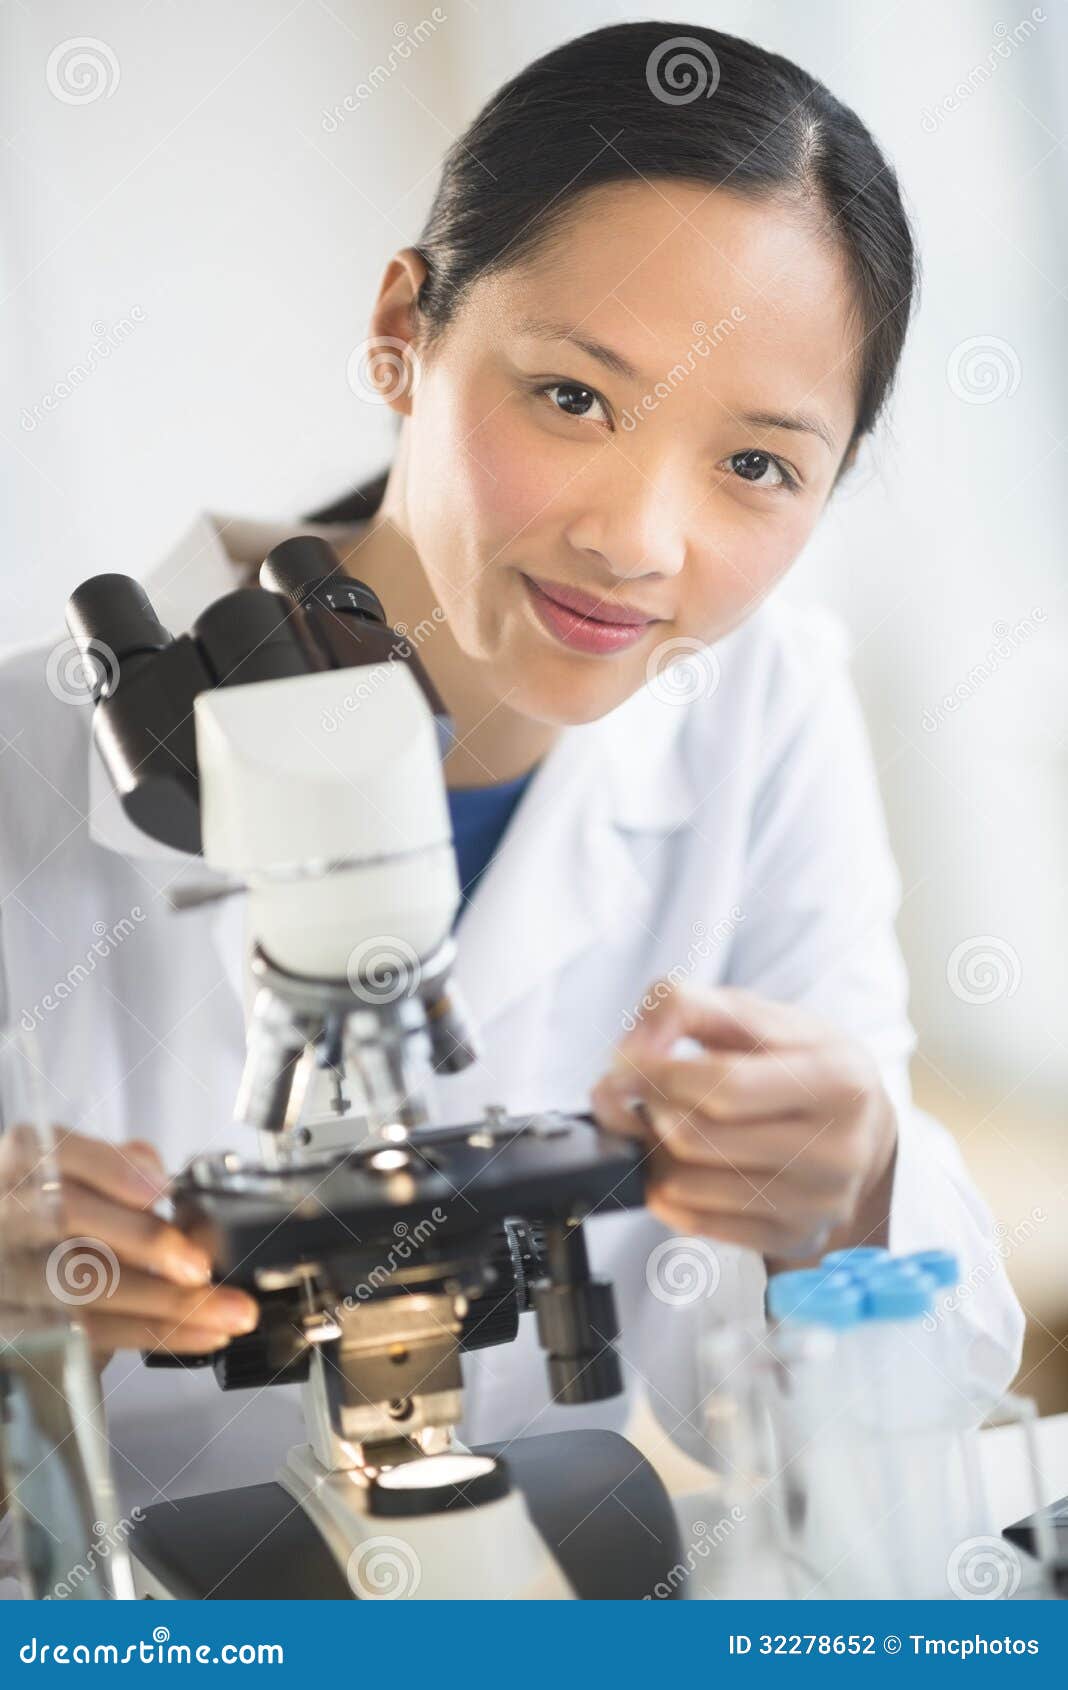 Female Scientist Smiling While Using Microscope Stock